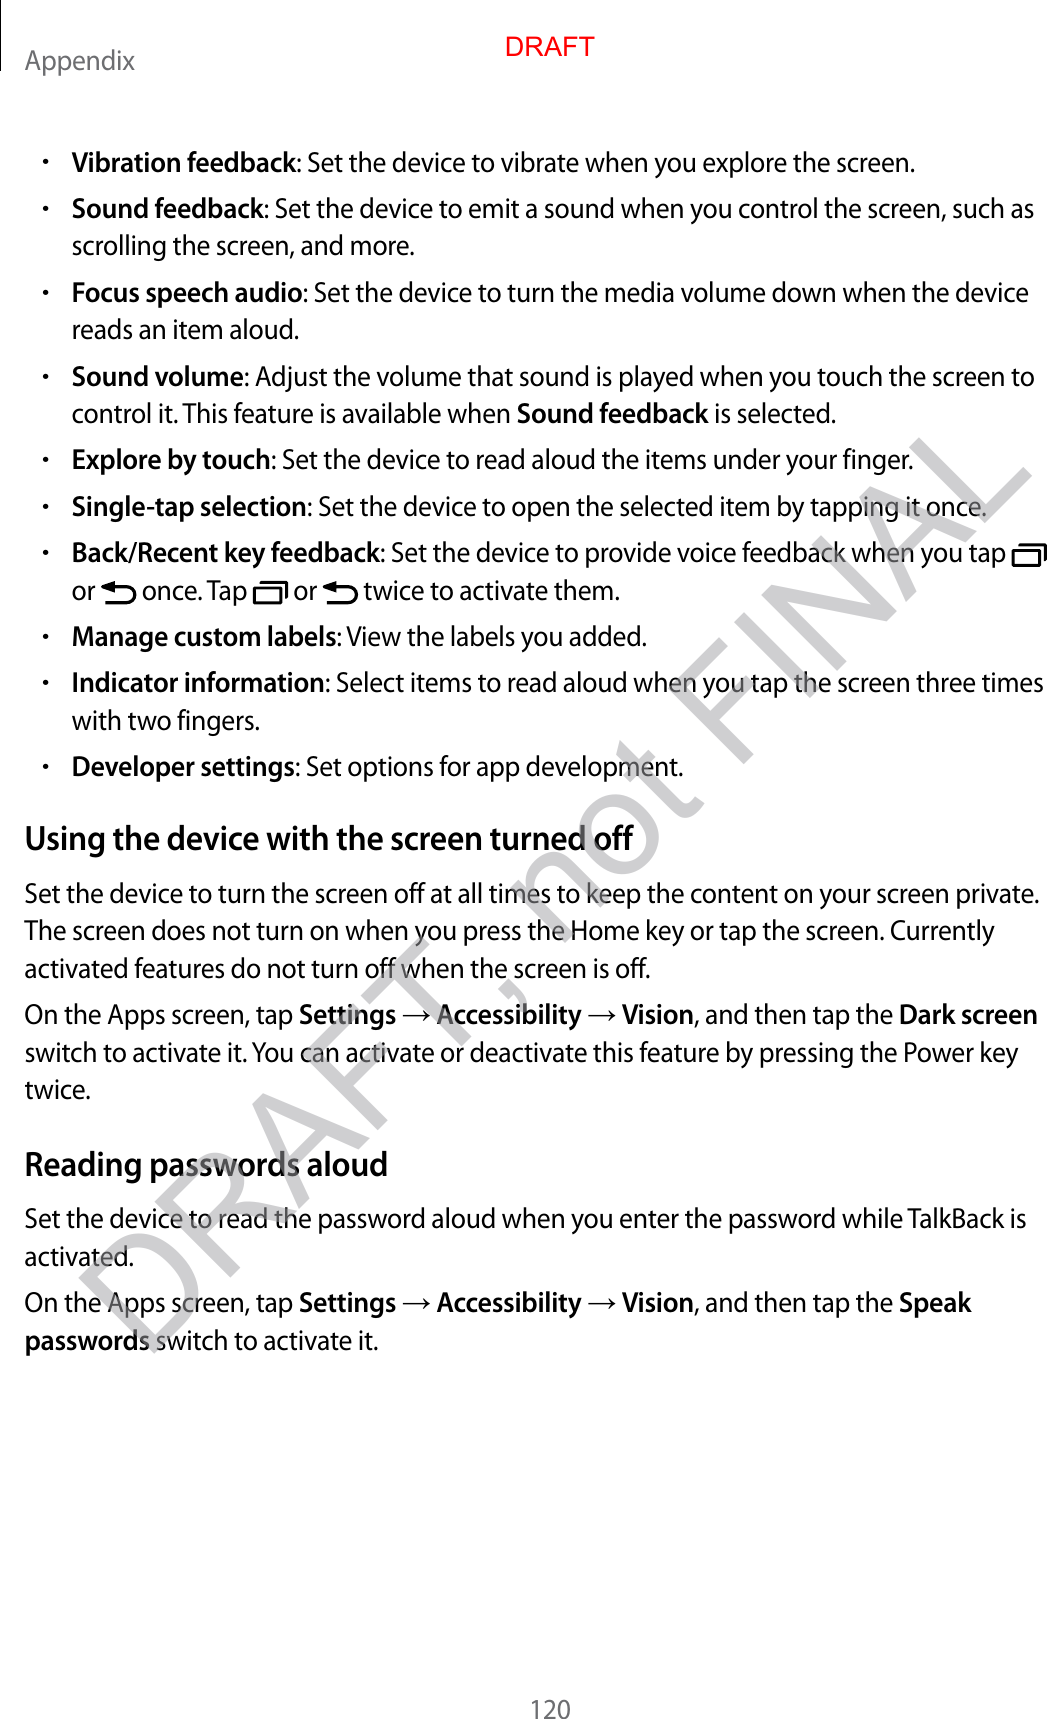 Appendix120•V ibr ation feedback: Set the device to vibrat e when y ou explor e the scr een.•Sound feedback: Set the device to emit a sound when you c ontr ol the scr een, such as scrolling the scr een, and mor e .•Focus speech audio: Set the device to turn the media volume do wn when the device reads an item aloud .•Sound volume: Adjust the v olume that sound is pla y ed when y ou t ouch the scr een to contr ol it. This feature is a v ailable when Sound feedback is selected.•Explore by t ouch: Set the device to read aloud the it ems under y our finger.•Single-tap selection: Set the device to open the selected item by tapping it onc e .•Back/Recent ke y f eedback: Set the device to pro vide v oic e f eedback when y ou tap   or   once. T ap   or   twice to activat e them.•Manage custom labels: View the labels y ou added .•Indicator informa tion: Select items to r ead aloud when y ou tap the scr een thr ee times with two fingers.•Developer settings: Set options for app developmen t.Using the devic e with the scr een turned offSet the device to turn the screen off at all times t o keep the c ont ent on y our scr een privat e . The screen does not turn on when y ou pr ess the Home key or tap the scr een. C urr ently activated fea tur es do not turn off when the screen is off.On the Apps screen, tap Settings  Accessibility  Vision, and then tap the Dark screen switch to activate it. You can activate or deactivate this featur e b y pr essing the Power key twice.Reading passwor ds aloudSet the device to read the passw or d aloud when y ou en ter the passw or d while TalkBack is activated.On the Apps screen, tap Settings  Accessibility  Vision, and then tap the Speak passwords switch to activate it.DRAFT, not FINALDRAFT